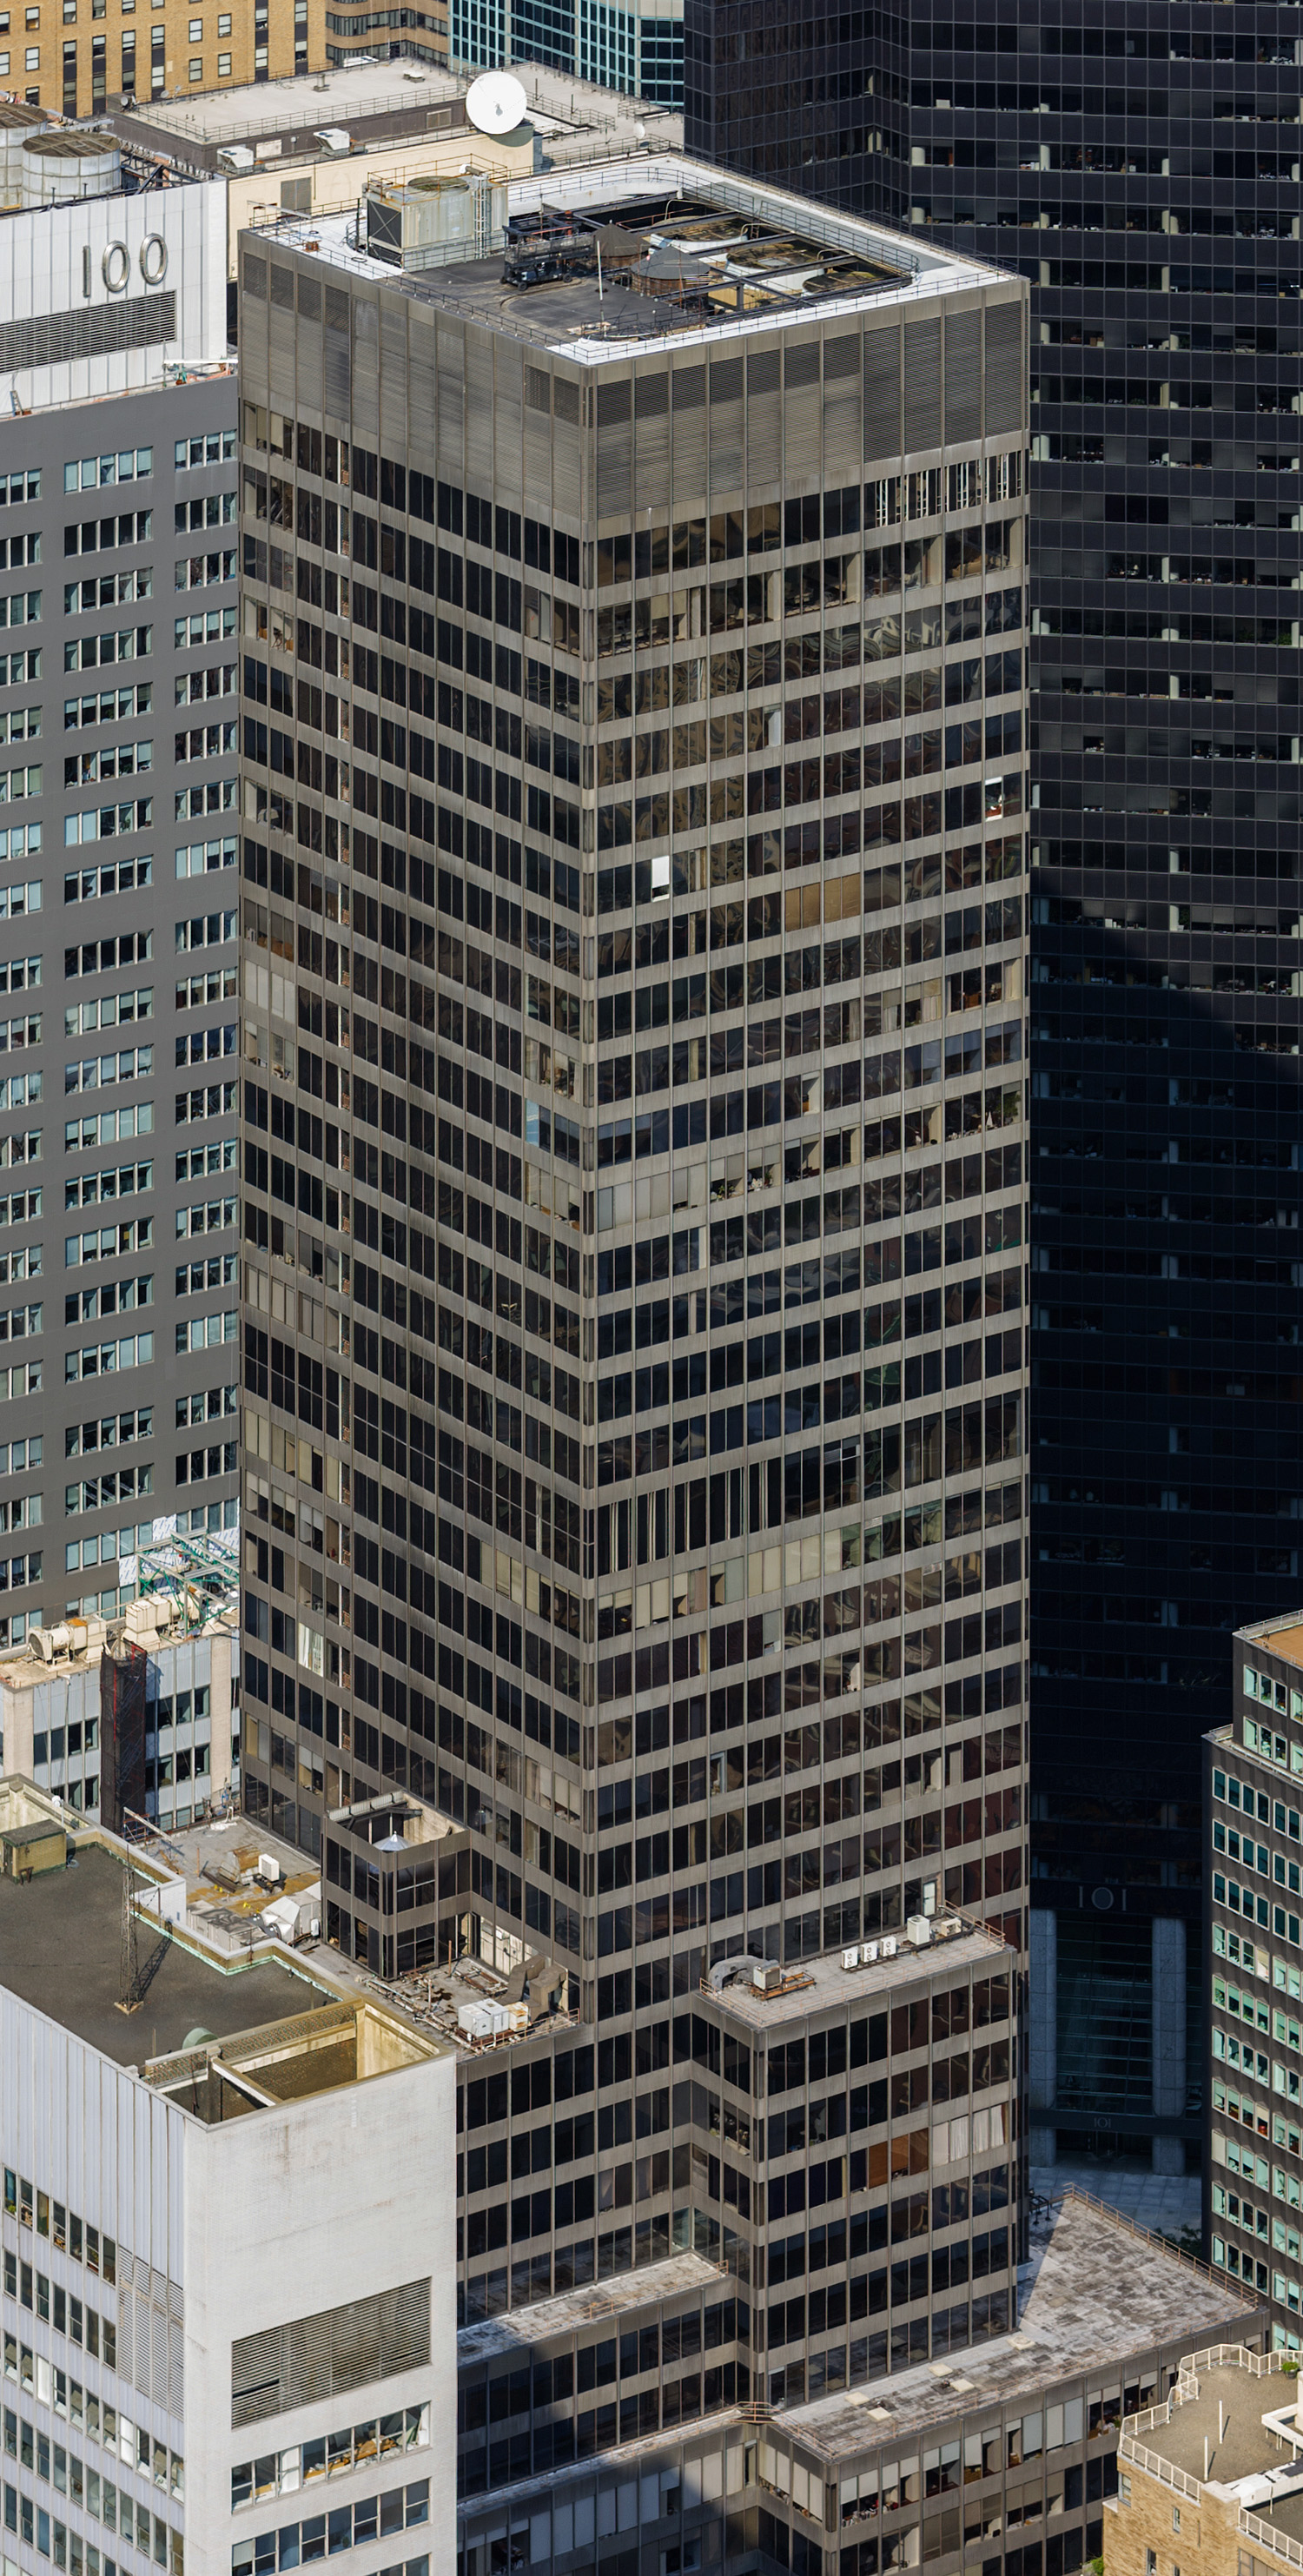 Sterling Drug Company Building, New York City - View from Empire State Building. © Mathias Beinling